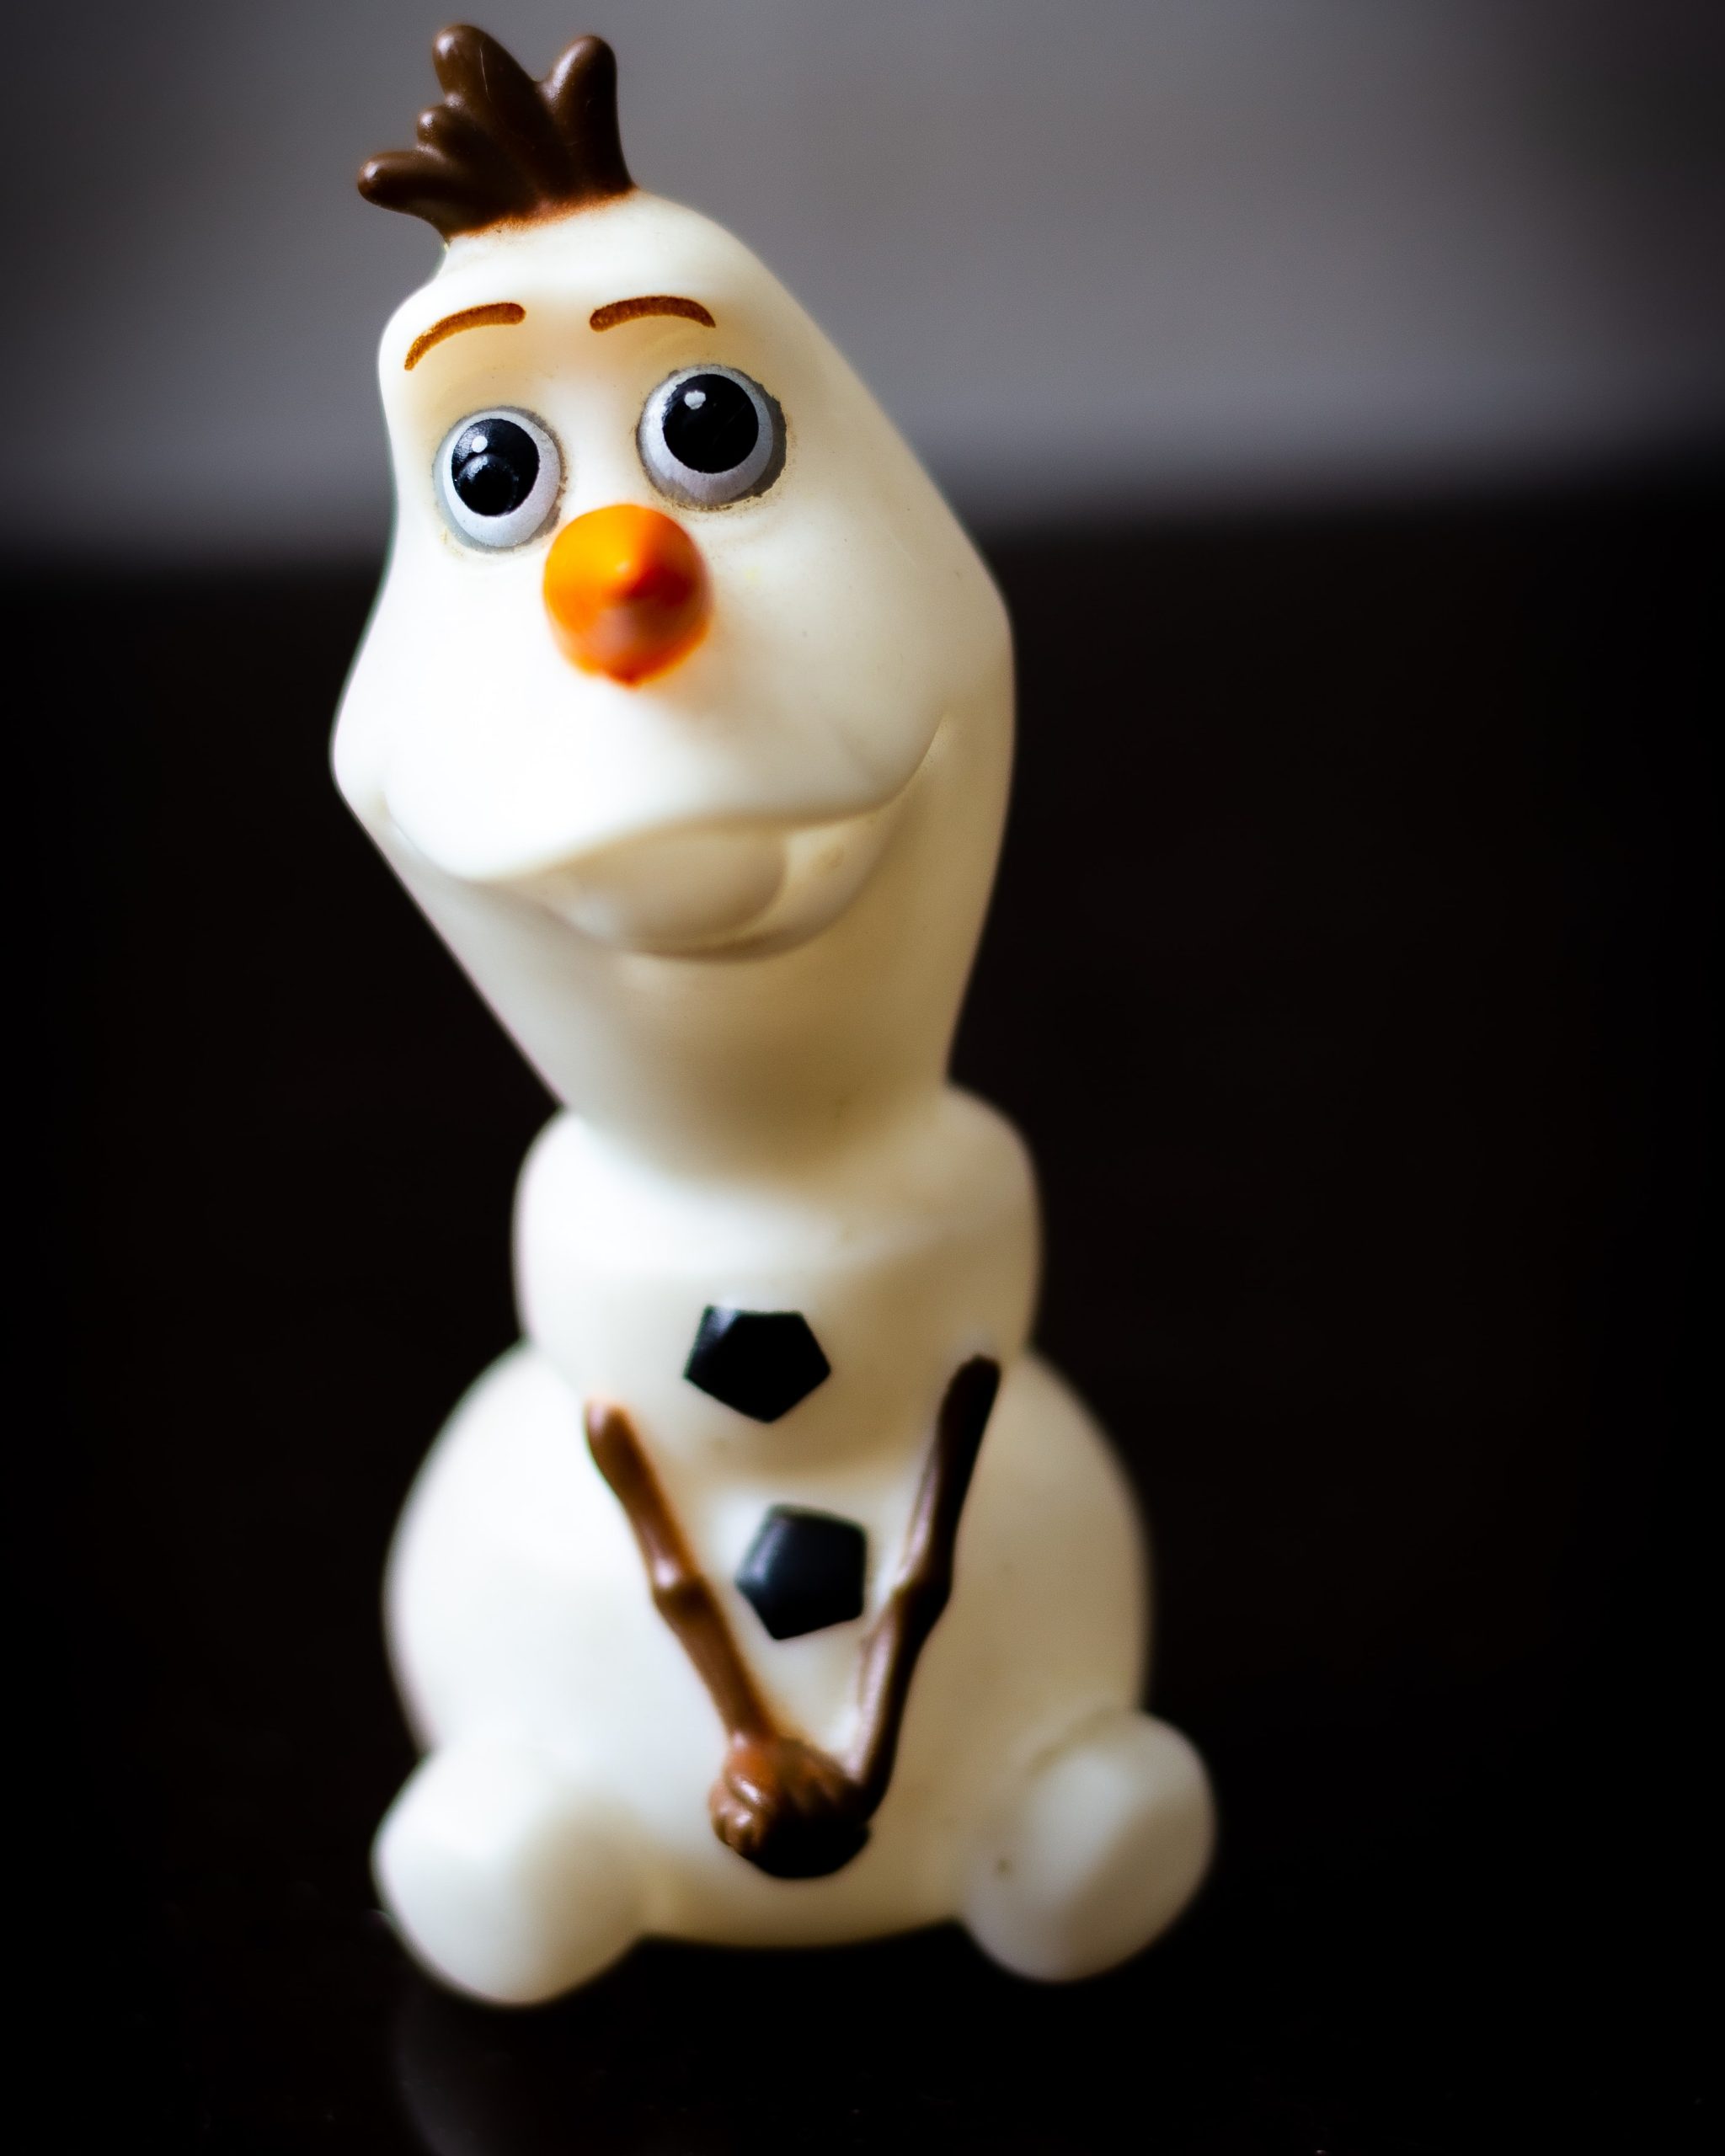 Miniature of Olaf from Frozen movie